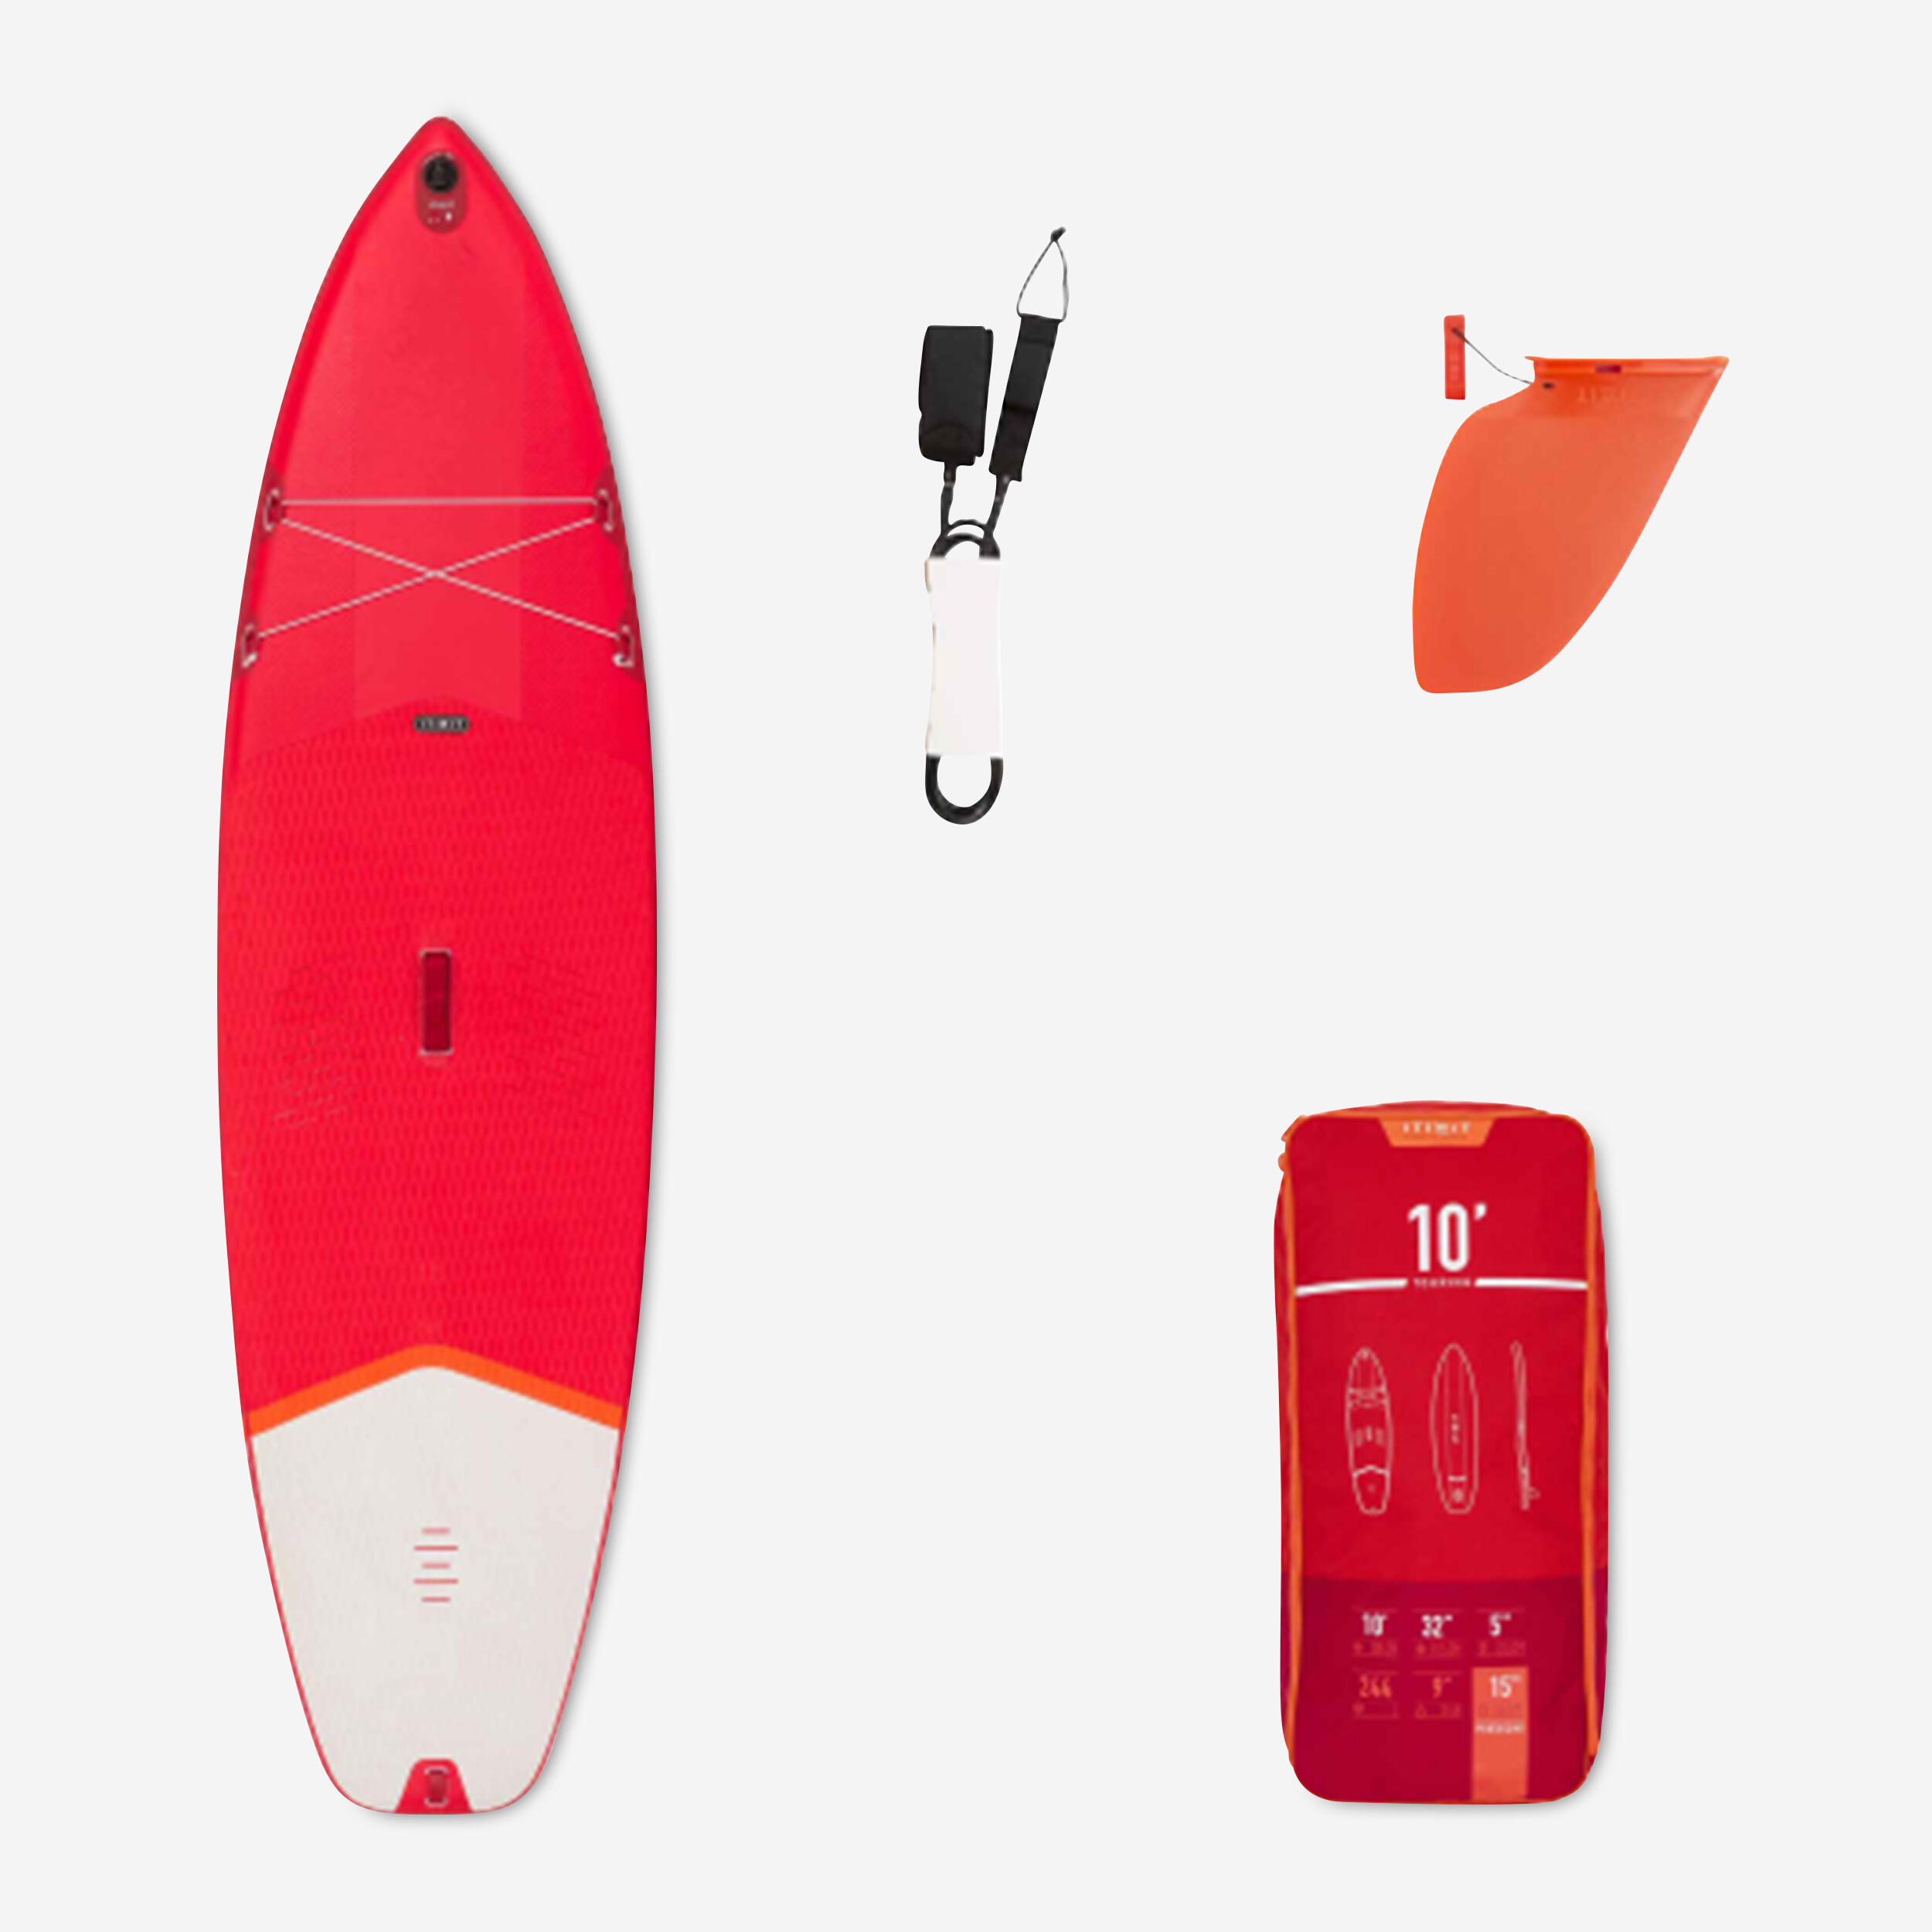 ITIWIT X100 10FT TOURING INFLATABLE STAND-UP PADDLEBOARD - RED